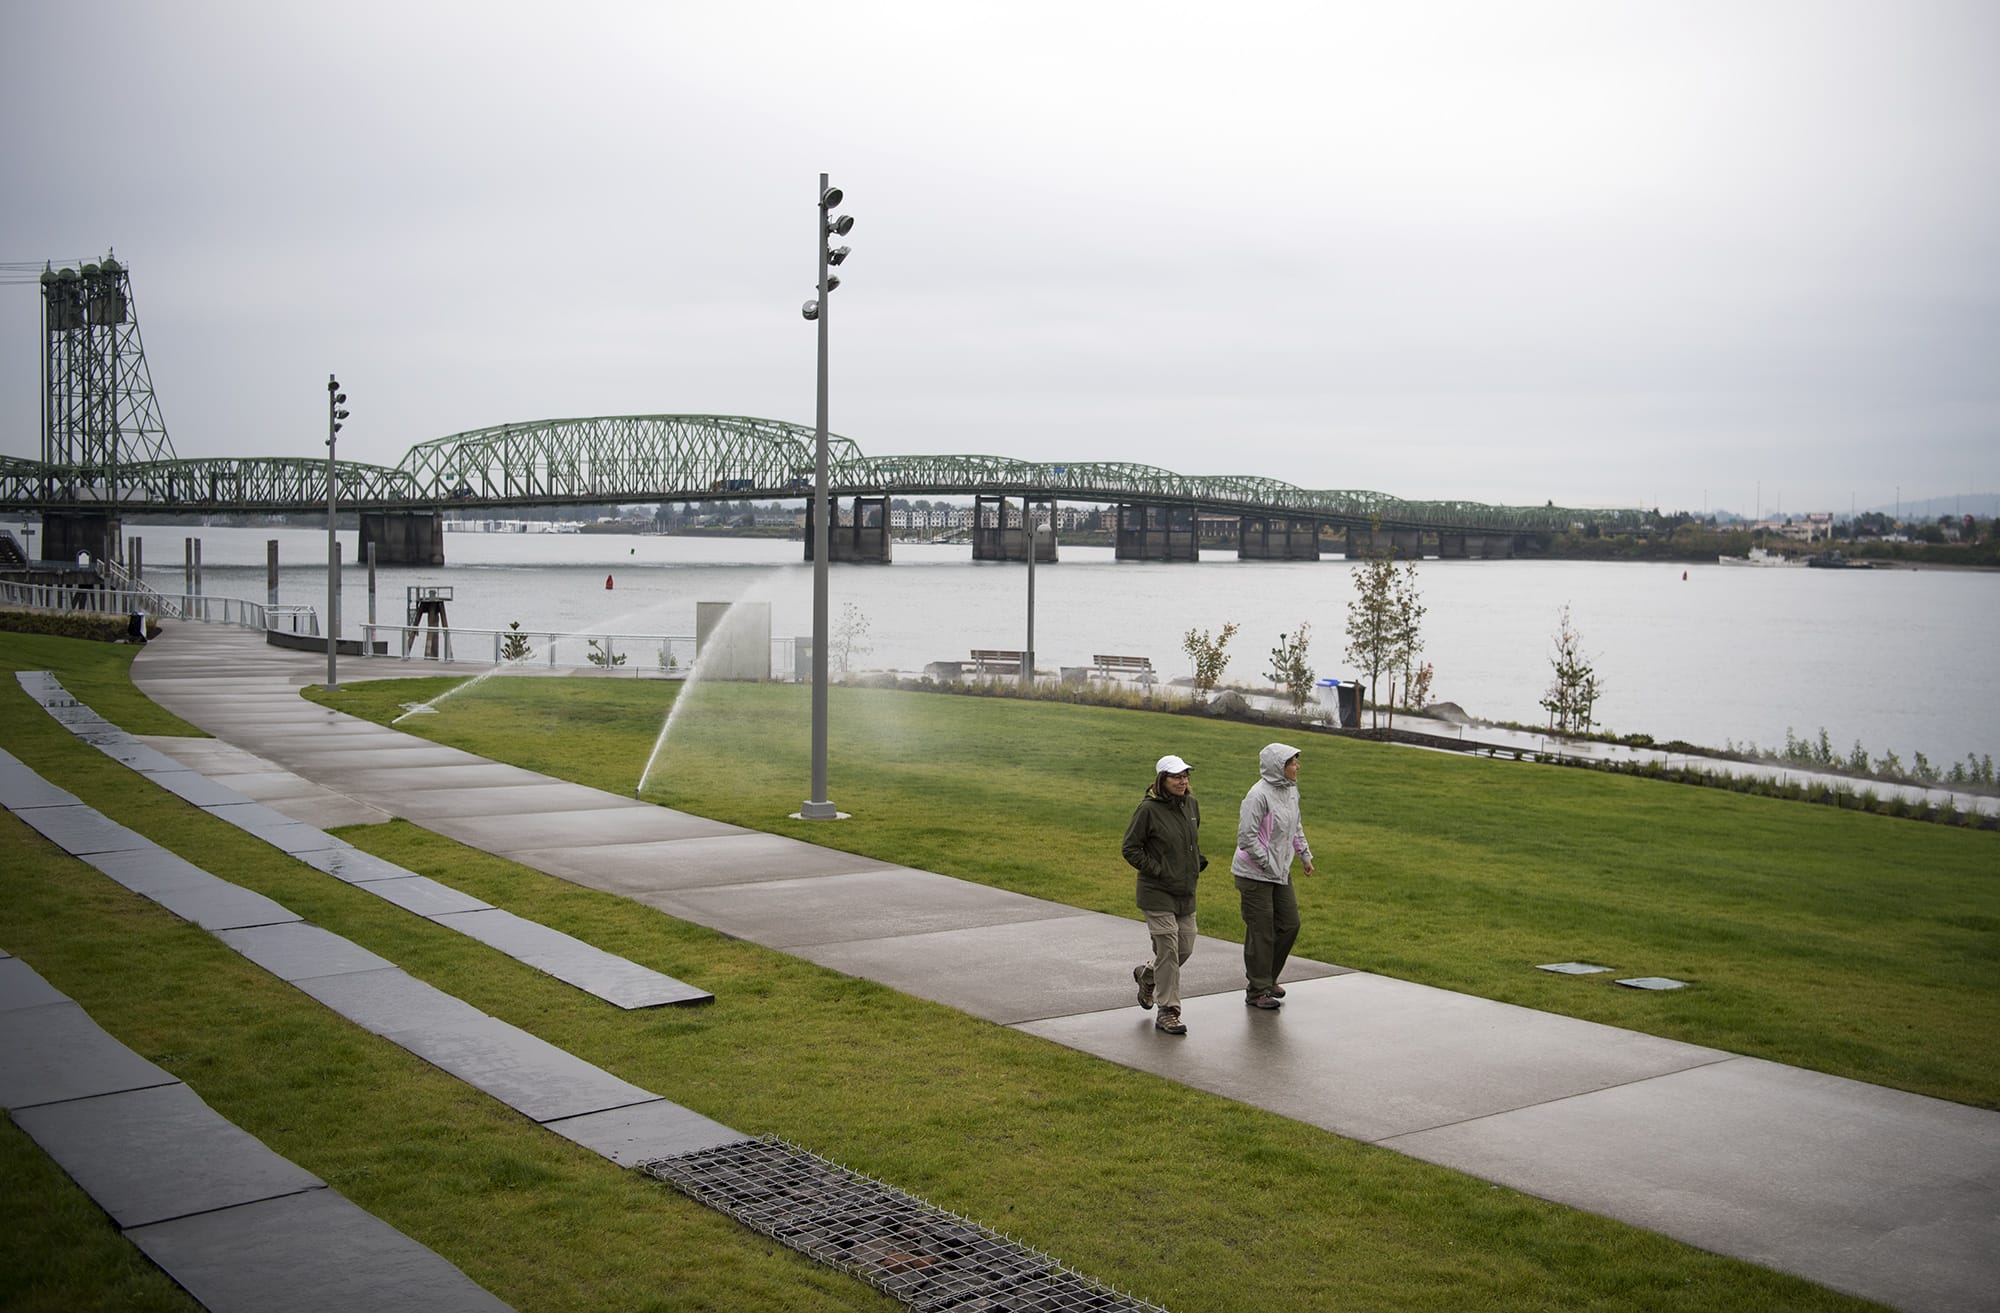 Kim Pohlman of Vancouver, left, Karen Conway of Cincinnati, Ohio, right, and walk along the Vancouver Waterfront Park on Friday afternoon, Oct. 5, 2018. Conway use to live in Vancouver and is back for a visit so the friends decided to brave the rain to check it out. "We were smiling because rain doesn't stop us," Pohlman said.